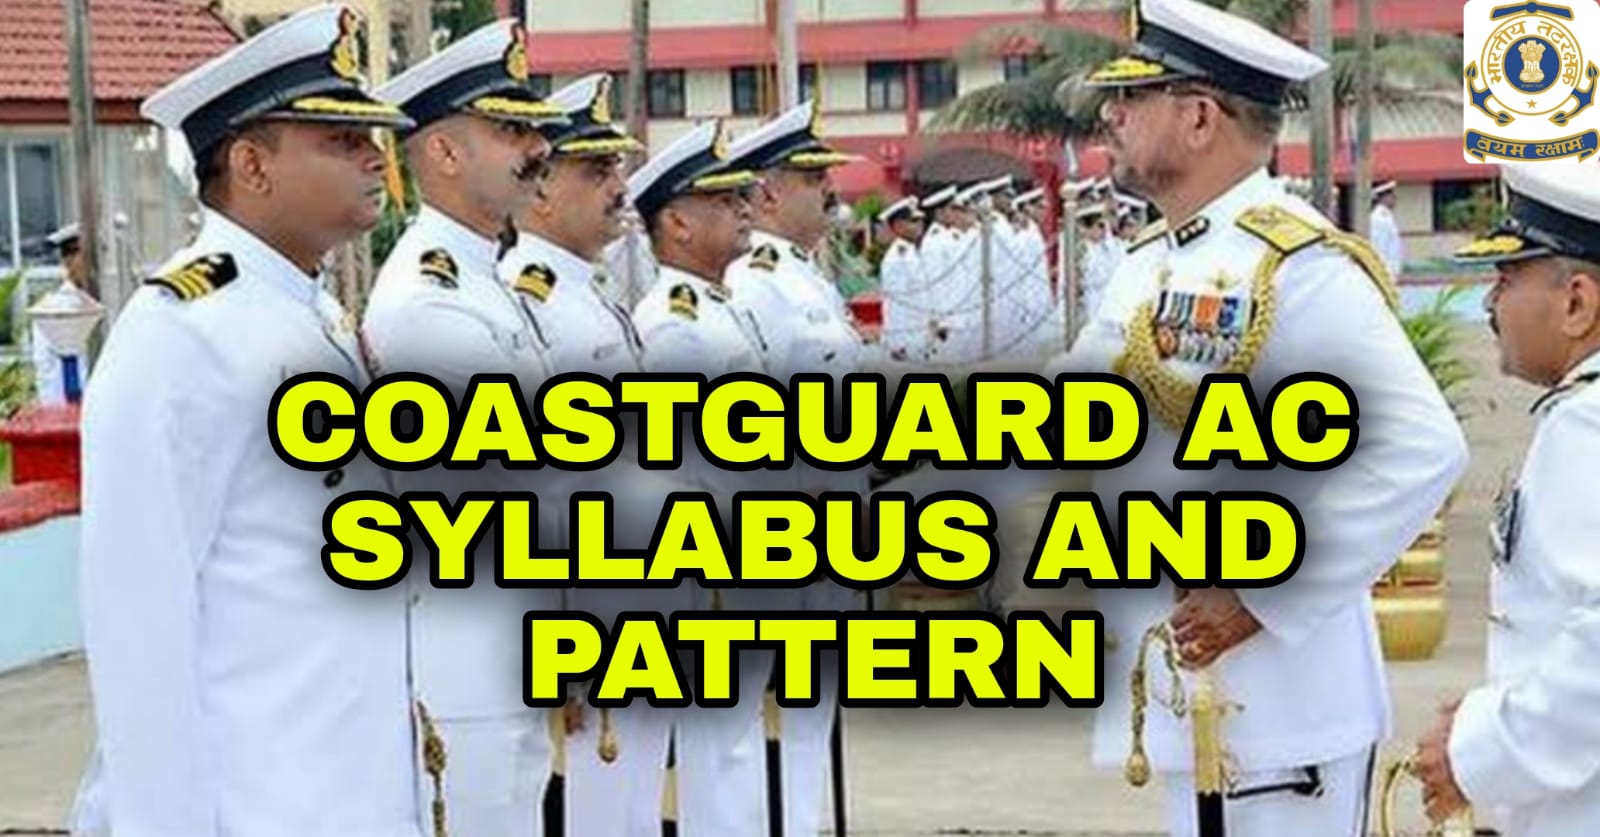 Coastguard Assistant Command New Syllabus and Pattern